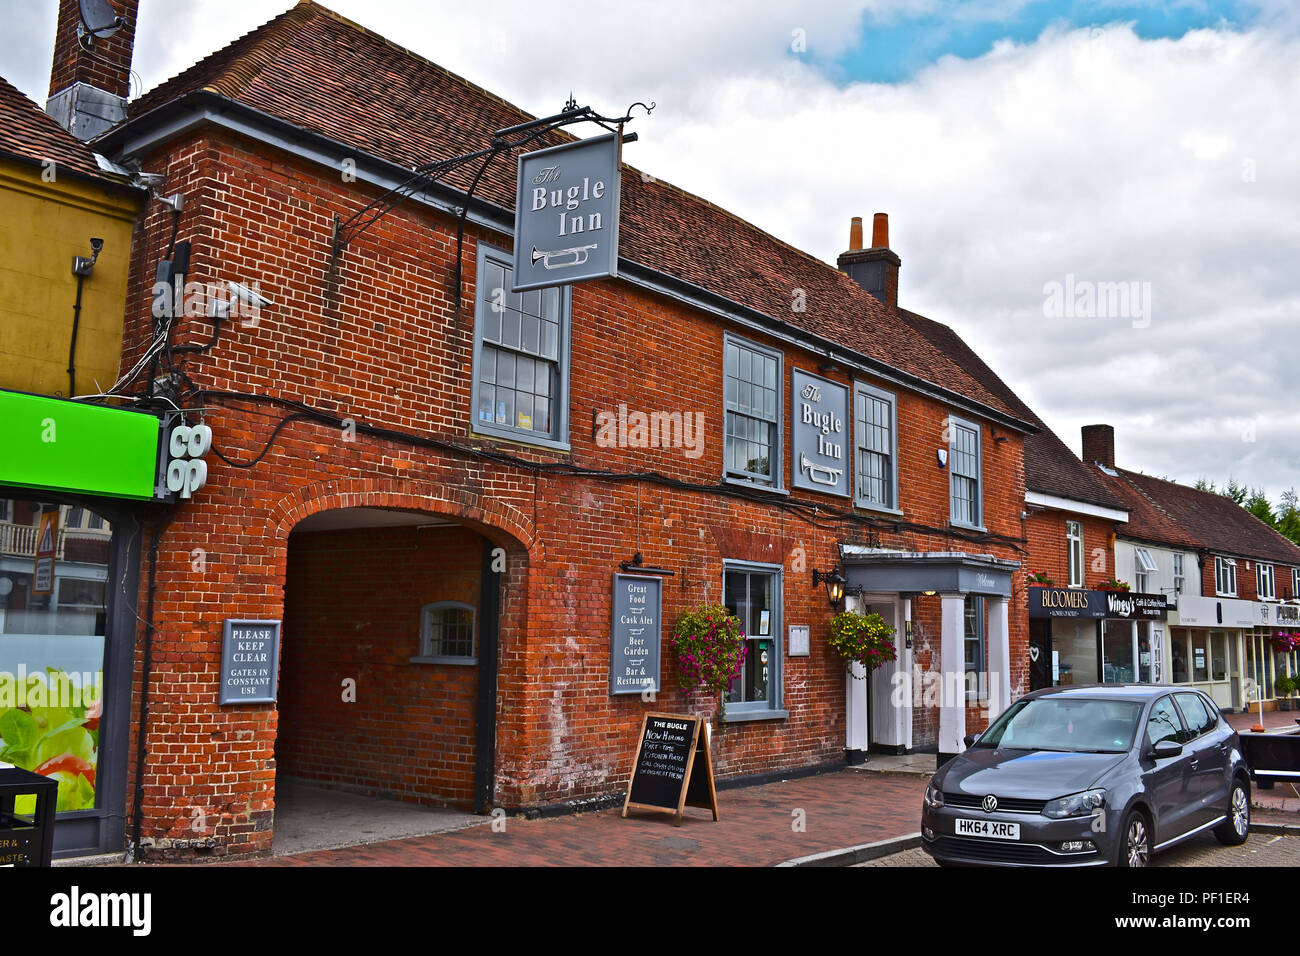 The traditional Bugle Inn, is an old coaching inn which is located in the historic village of Botley, near Southampton. Stock Photo